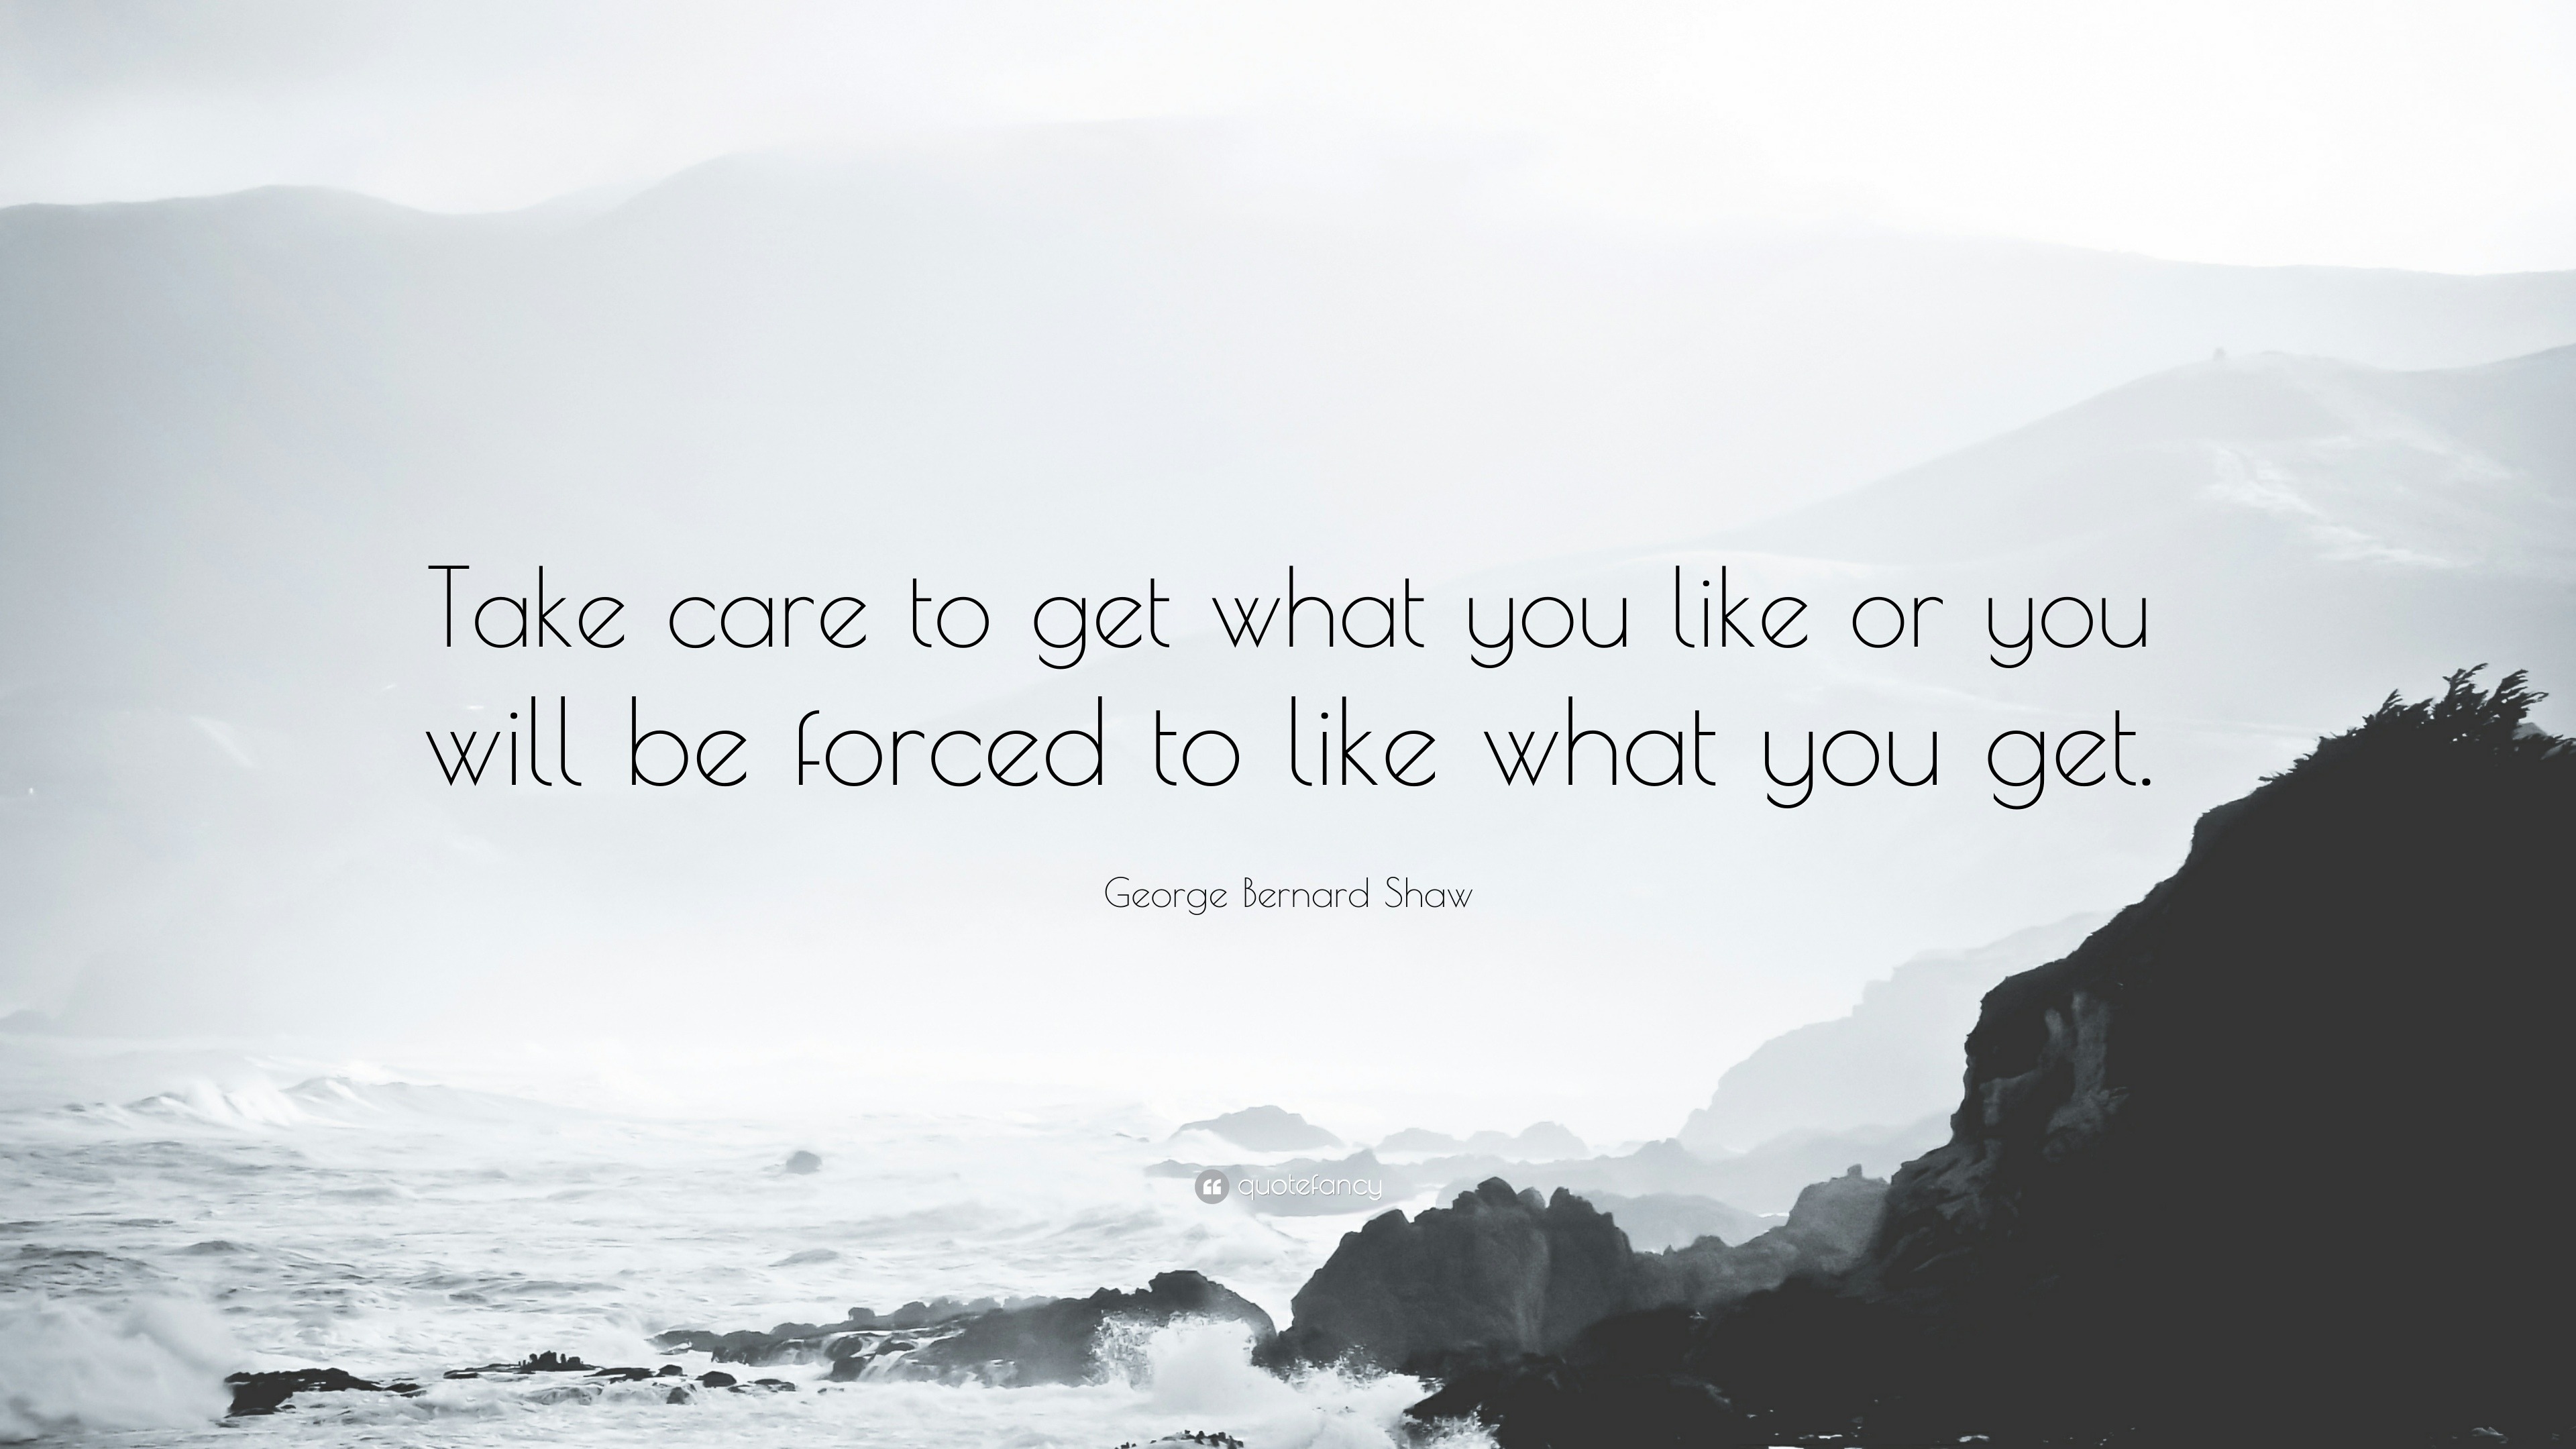 George Bernard Shaw Quote Take Care To Get What You Like Or You Will Be Forced To Like What You Get 12 Wallpapers Quotefancy